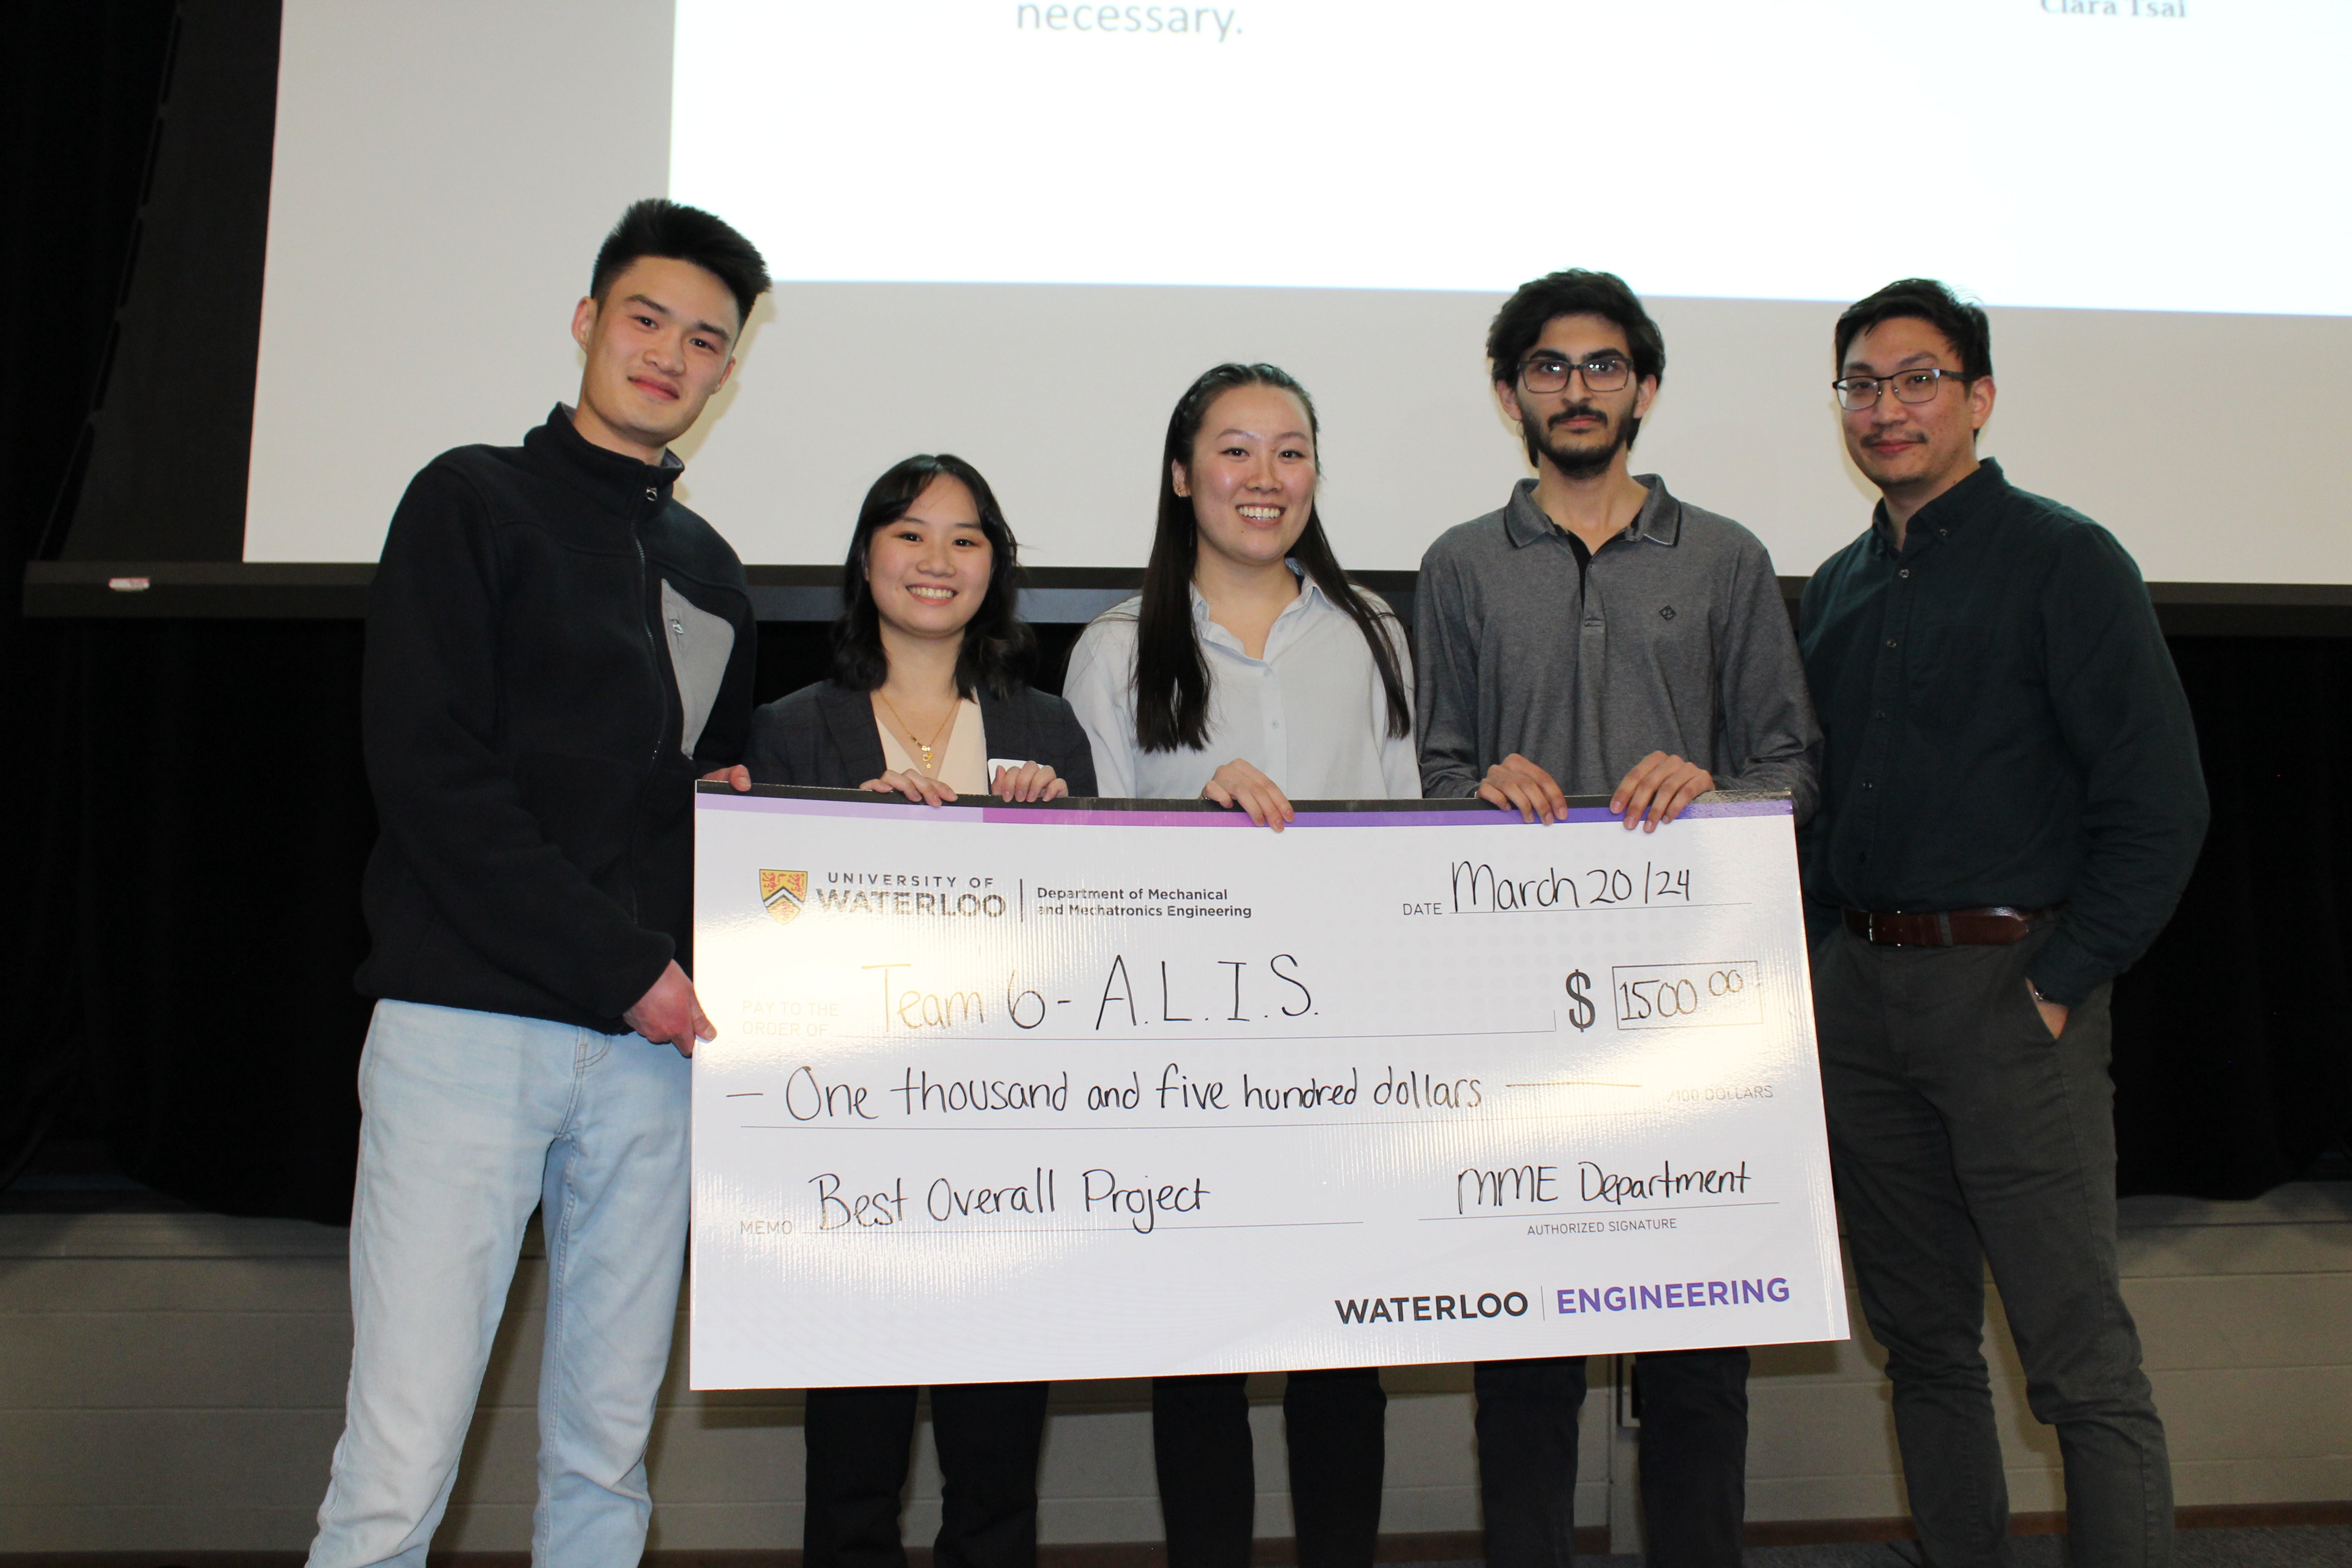 A.L.I.S. winning the Best Overall Design